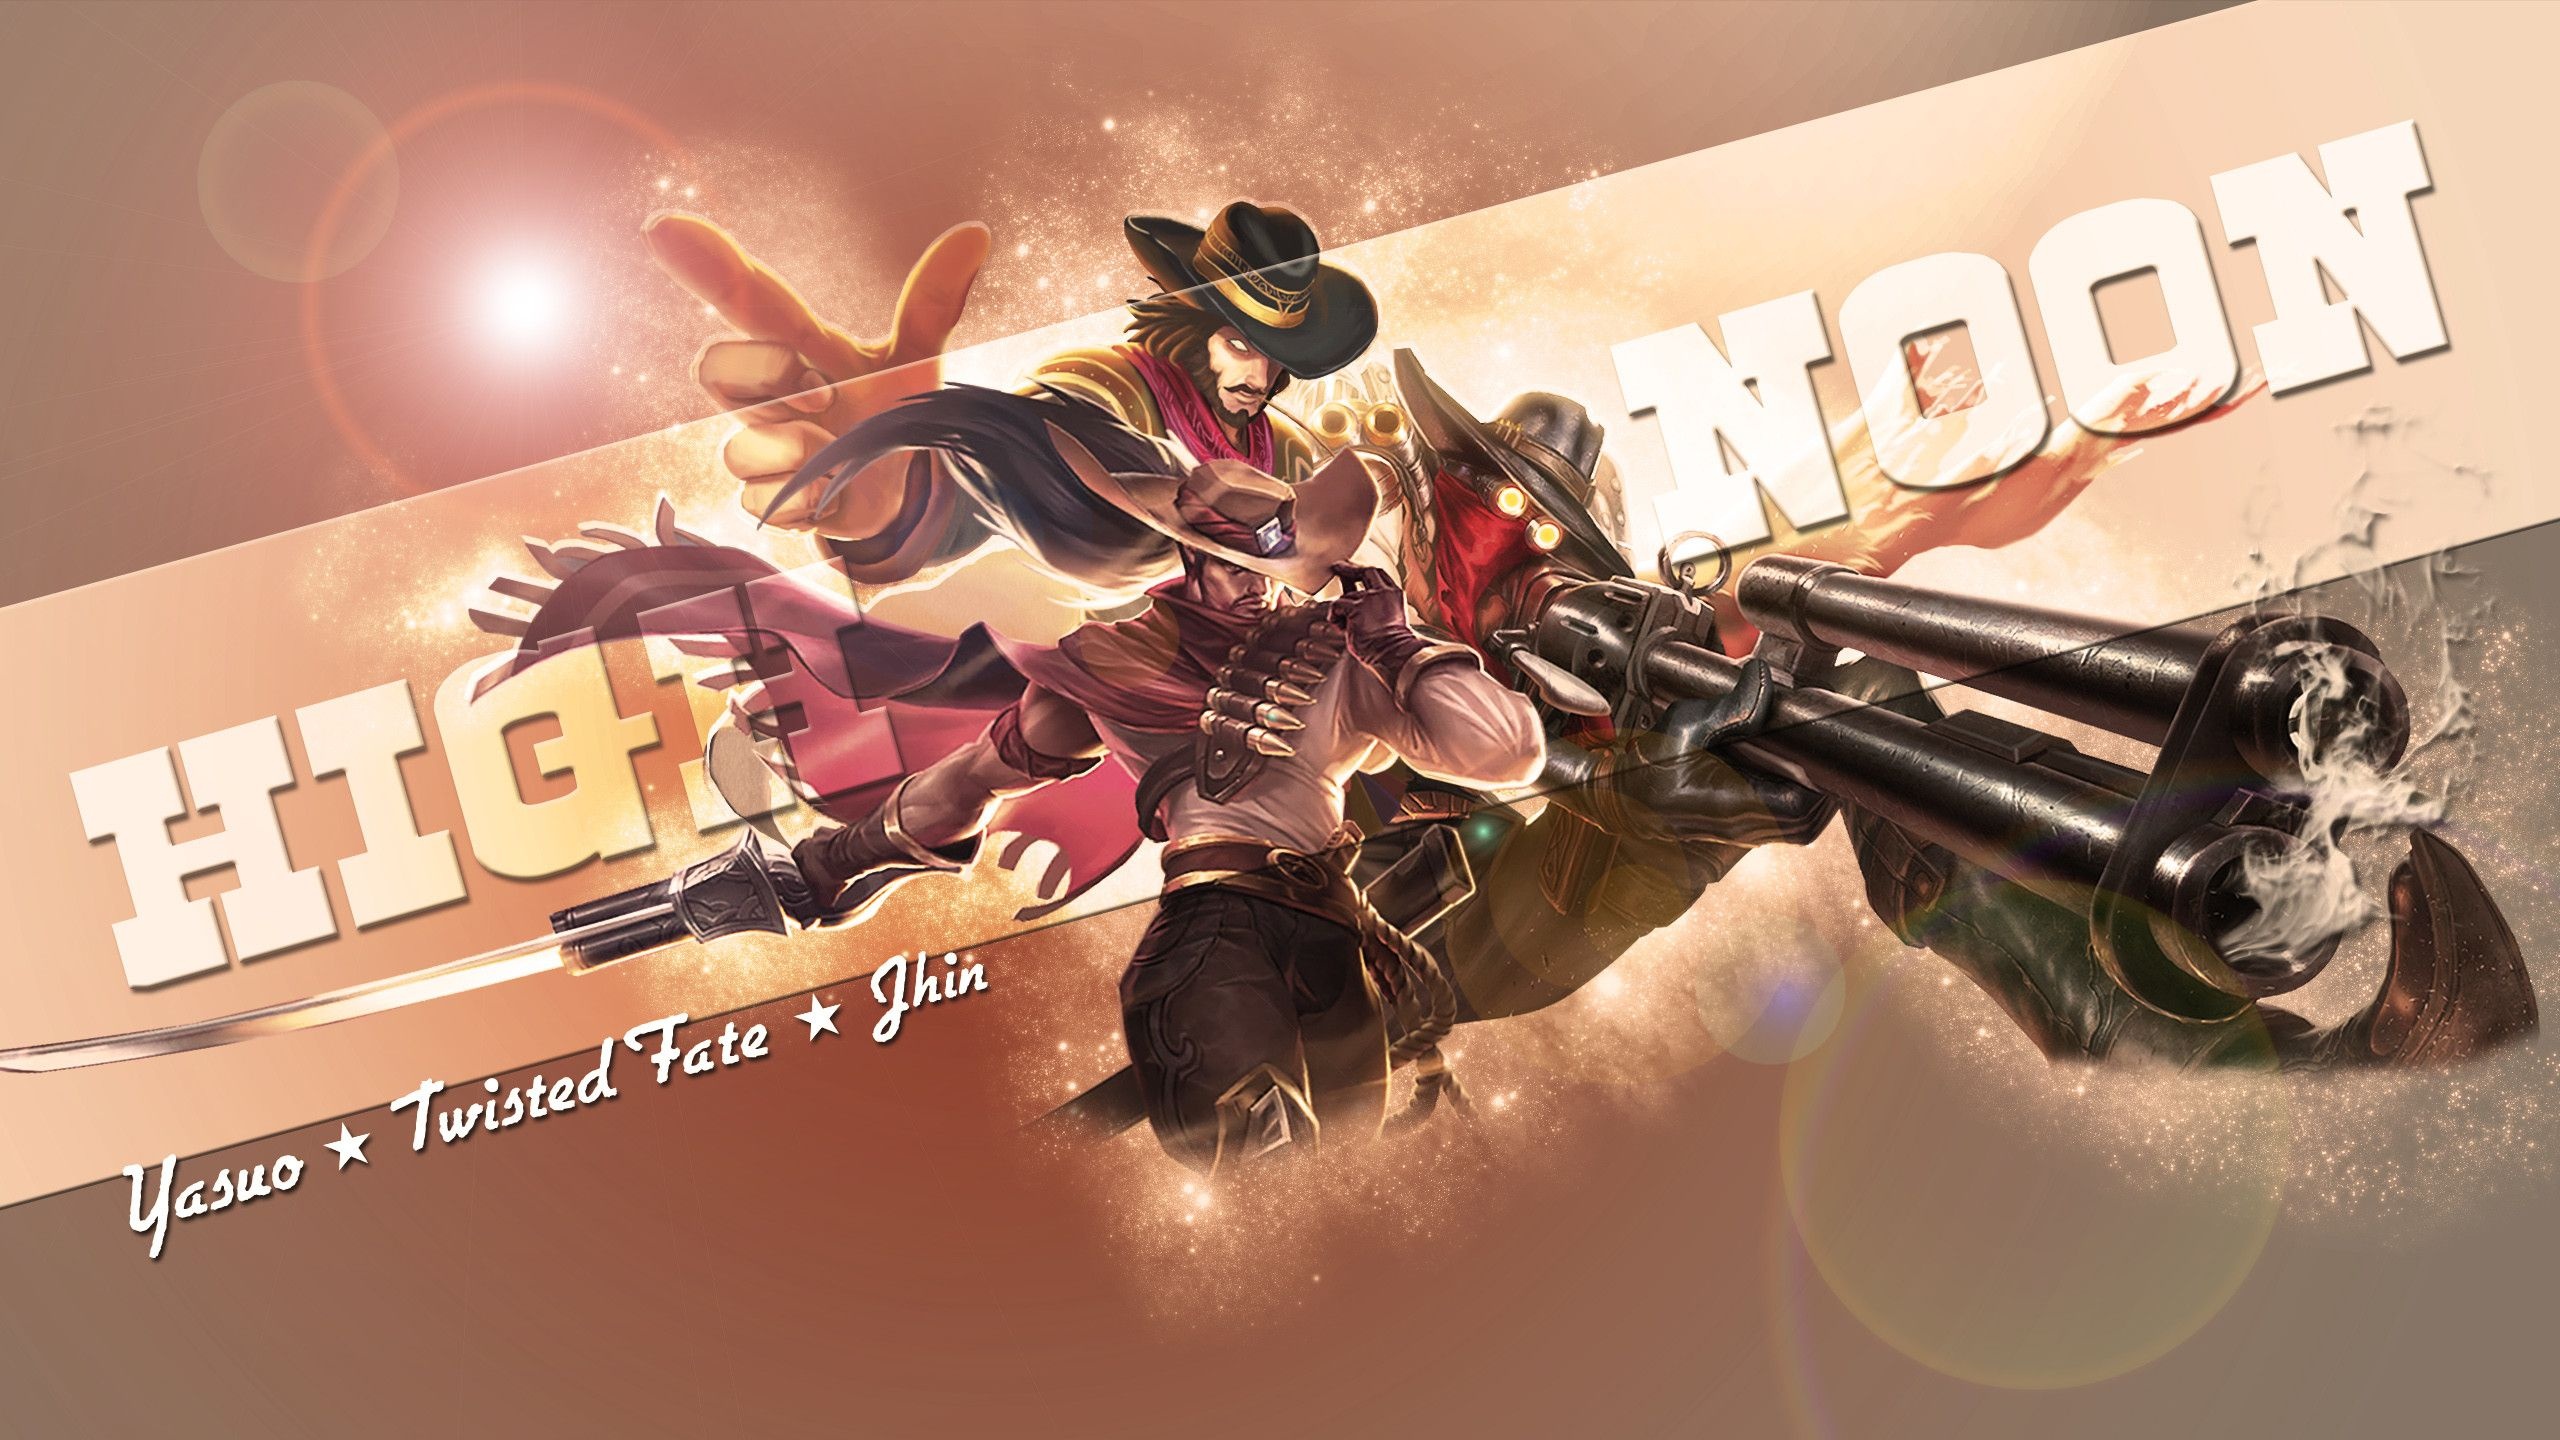 High Noon Jhin Wallpapers - Top Free High Noon Jhin Backgrounds 2560x1440